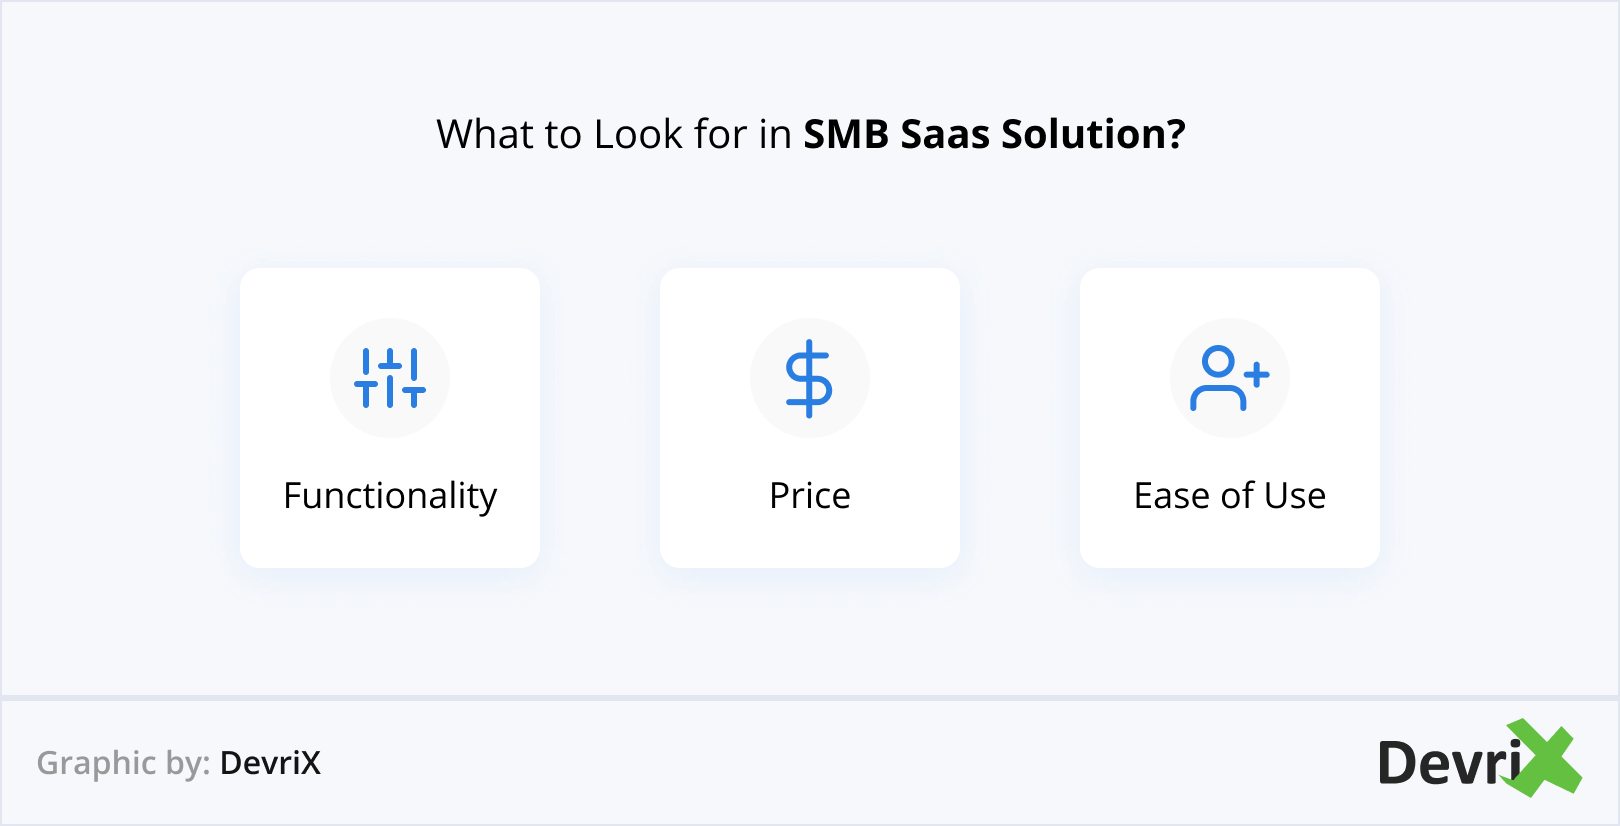 What to Look for in SMB SaaS Solution